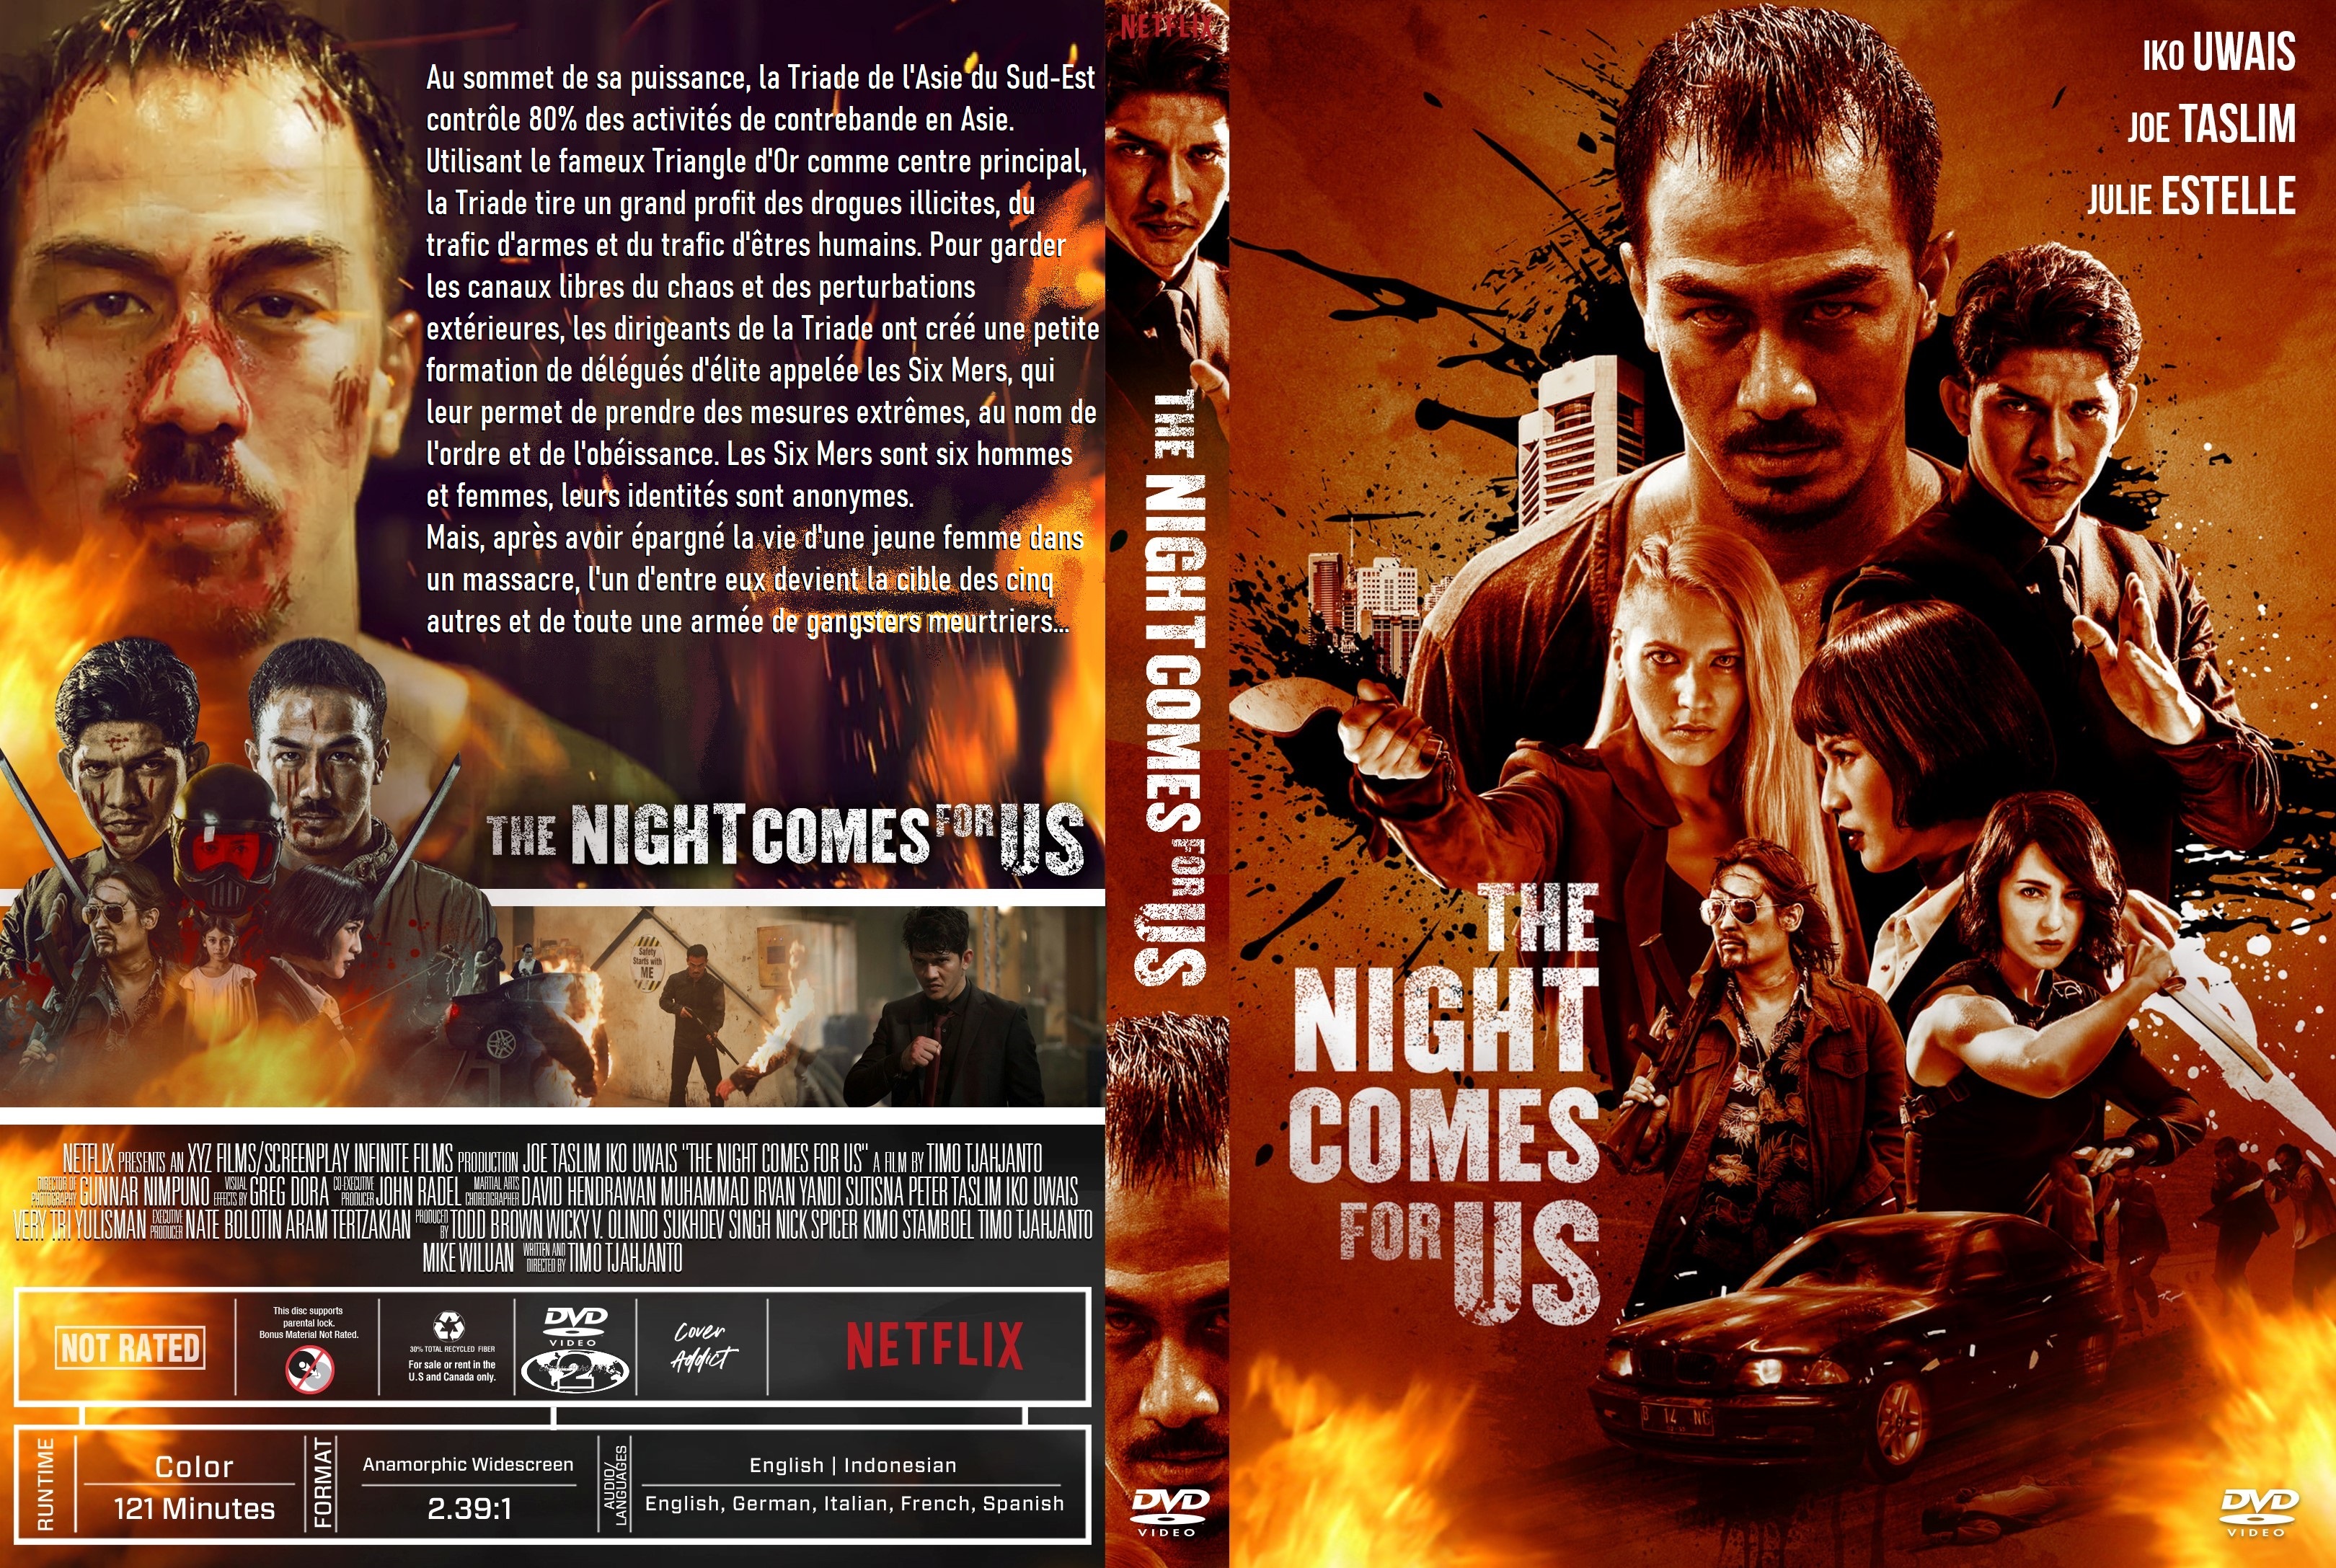 Jaquette DVD The Night Comes For Us custom